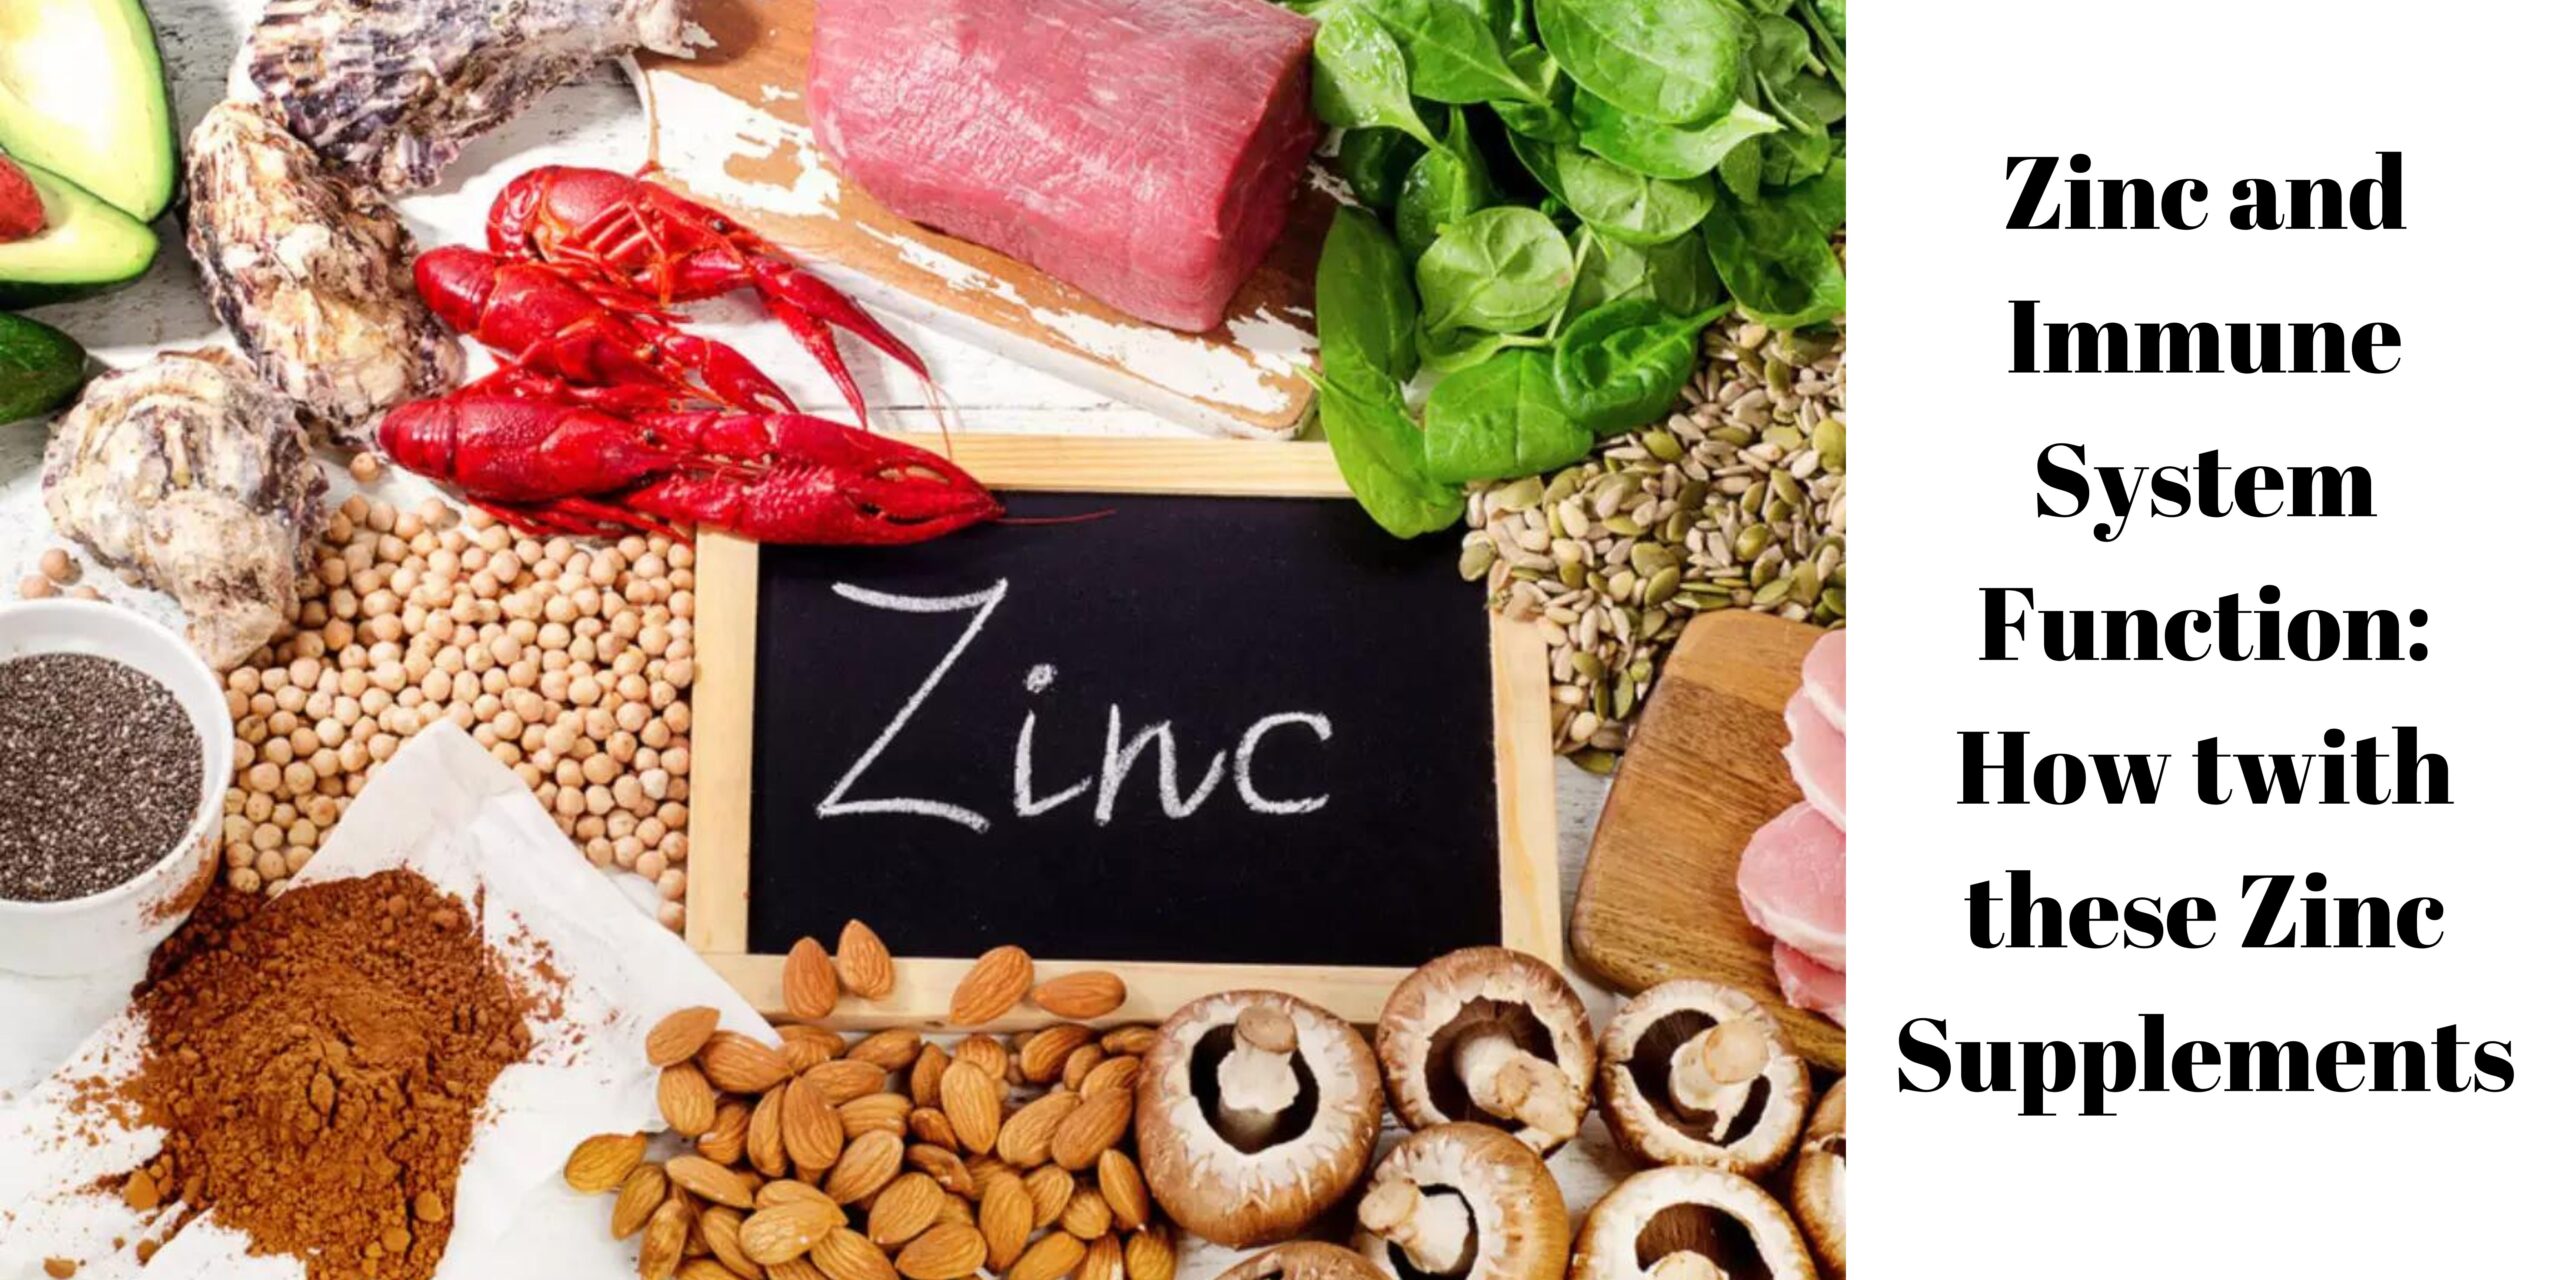 Zinc and Immune System Function: How twith these Zinc Supplements